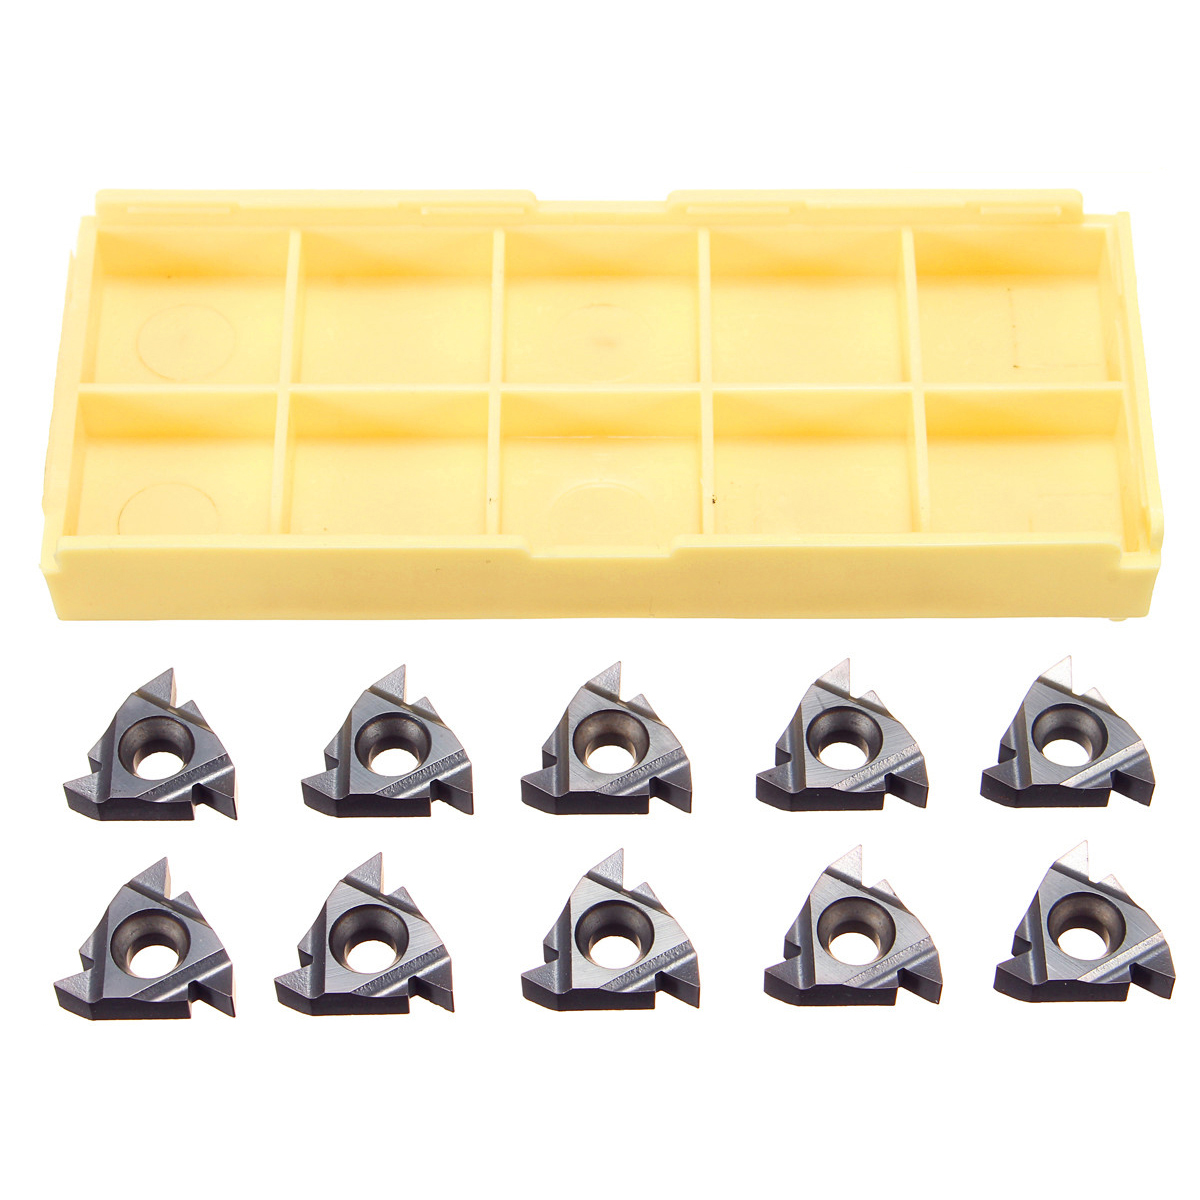 Drillpro 10PCS 16ER AG55 Carbide Threading Inserts For Steel/Stainless Steel Turning Tool